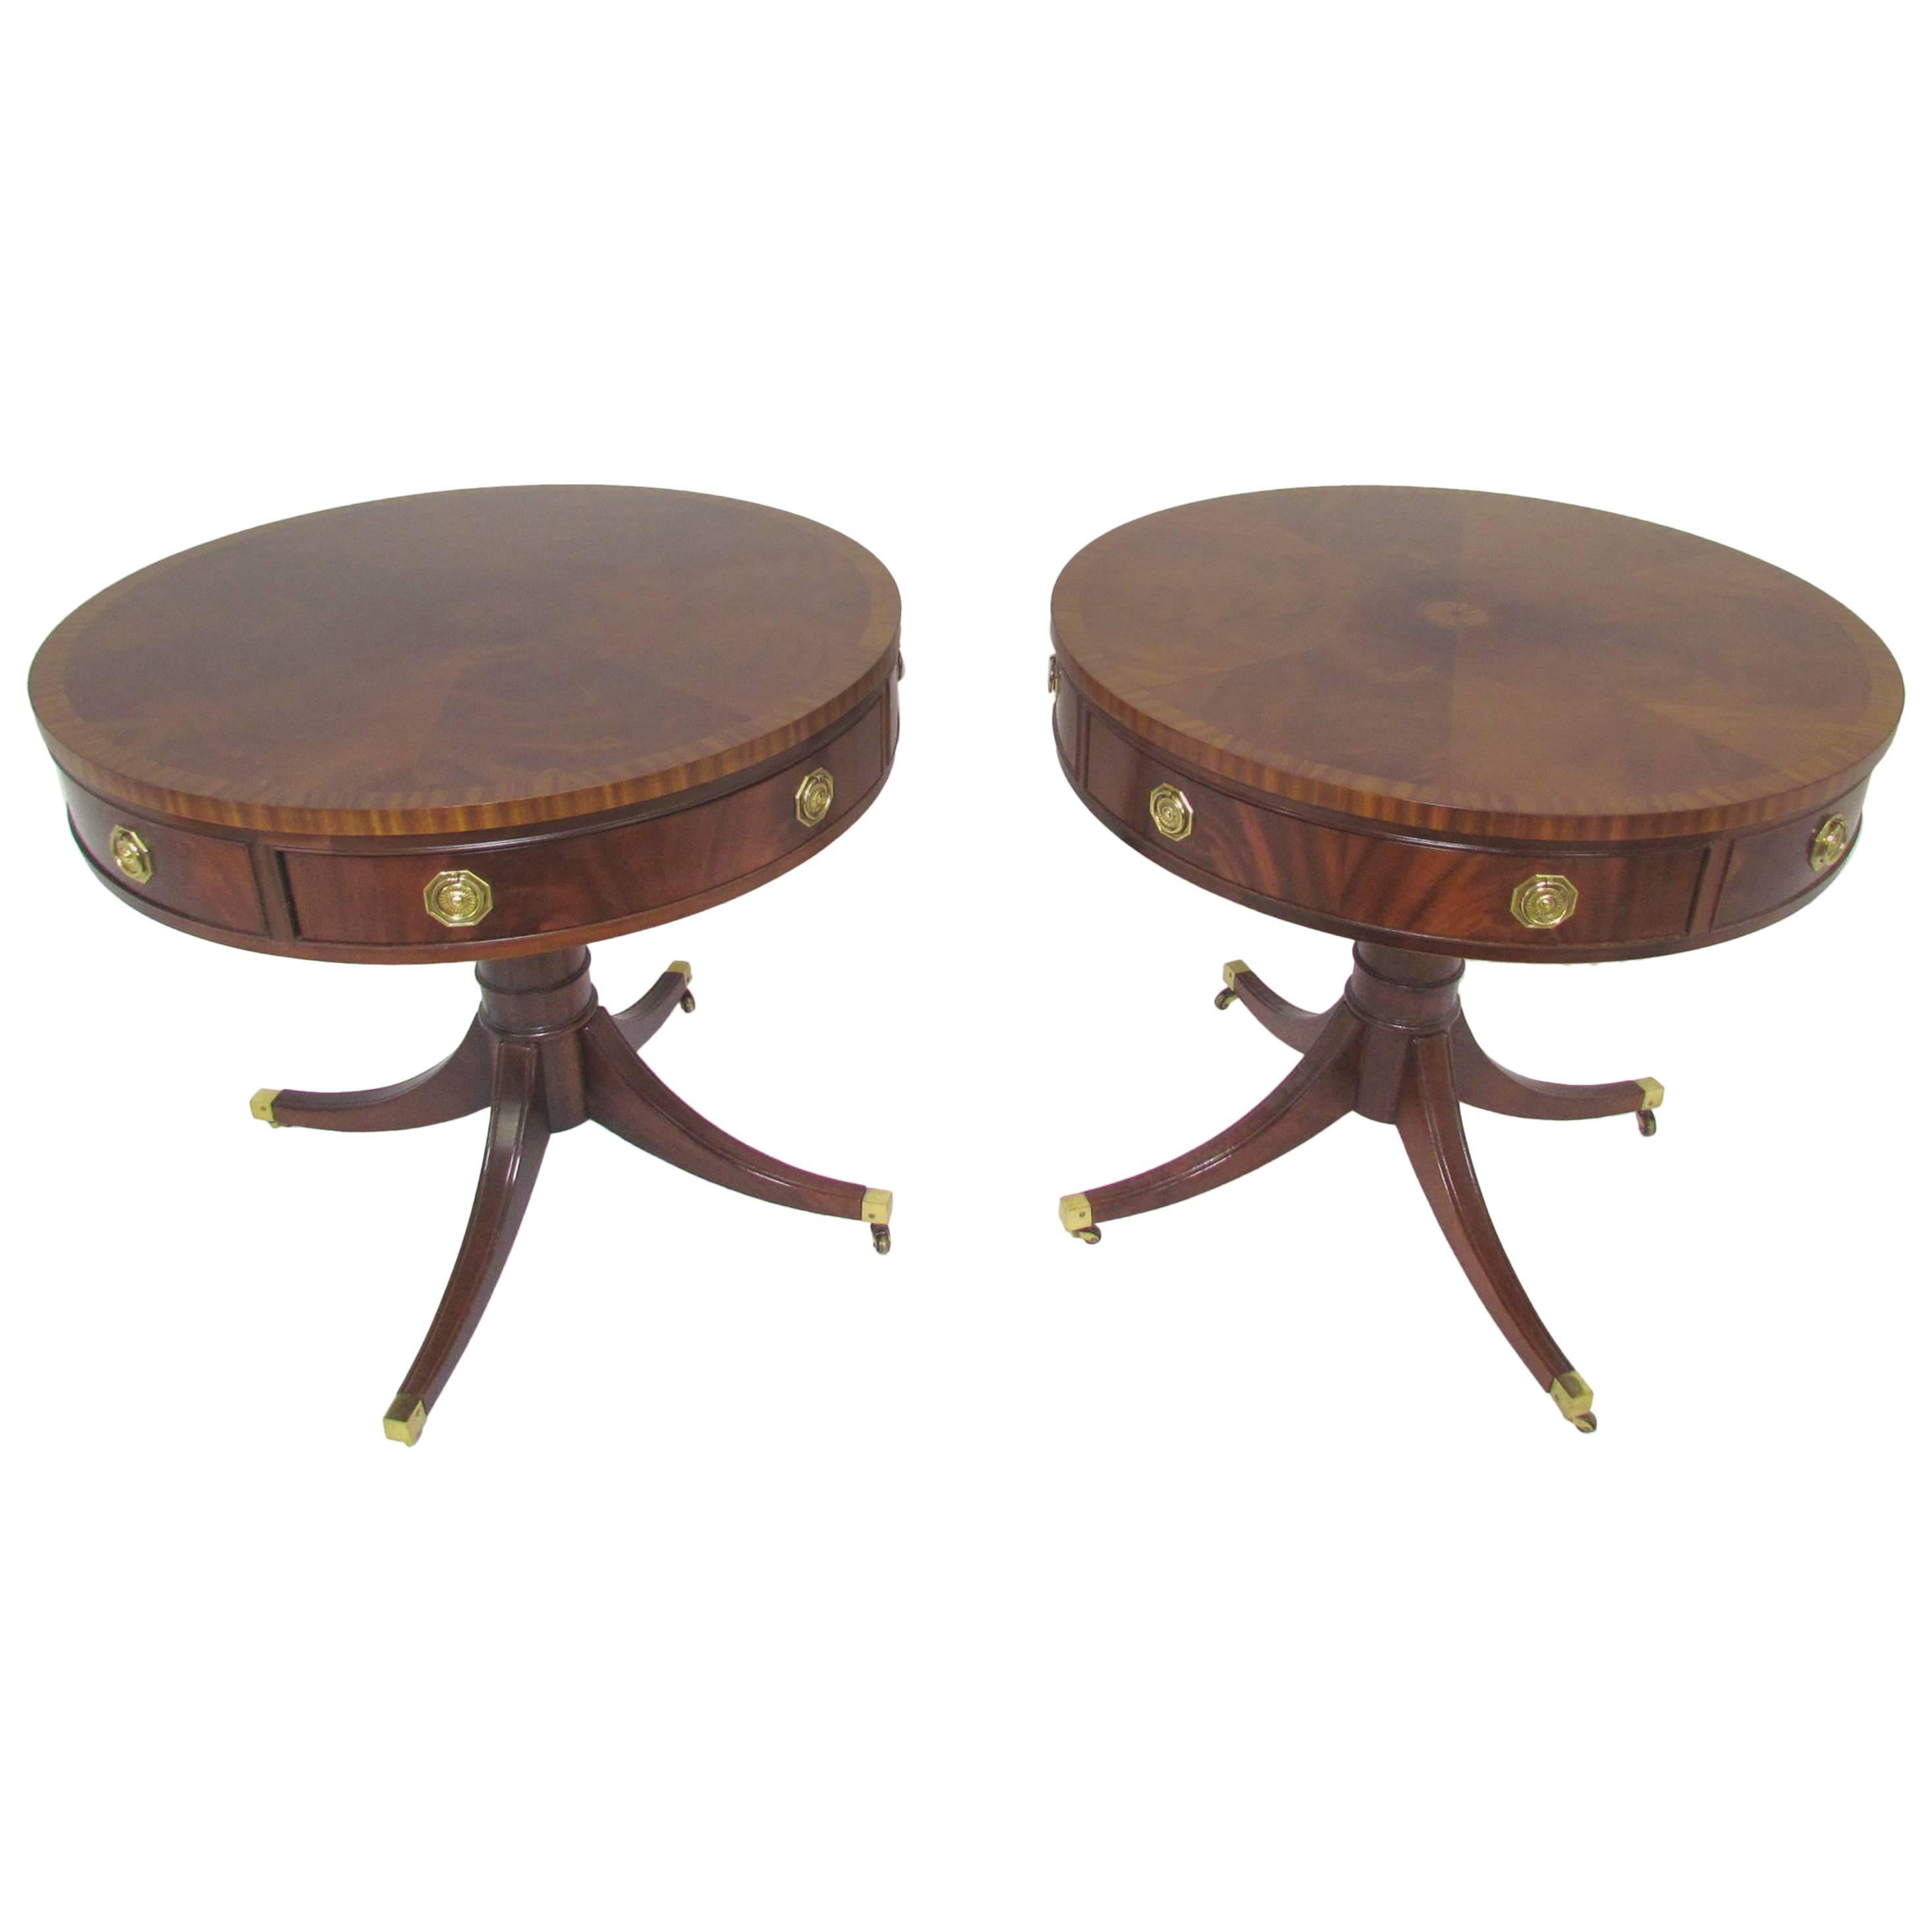 Pair of English Regency Style Rent or Drum Tables 